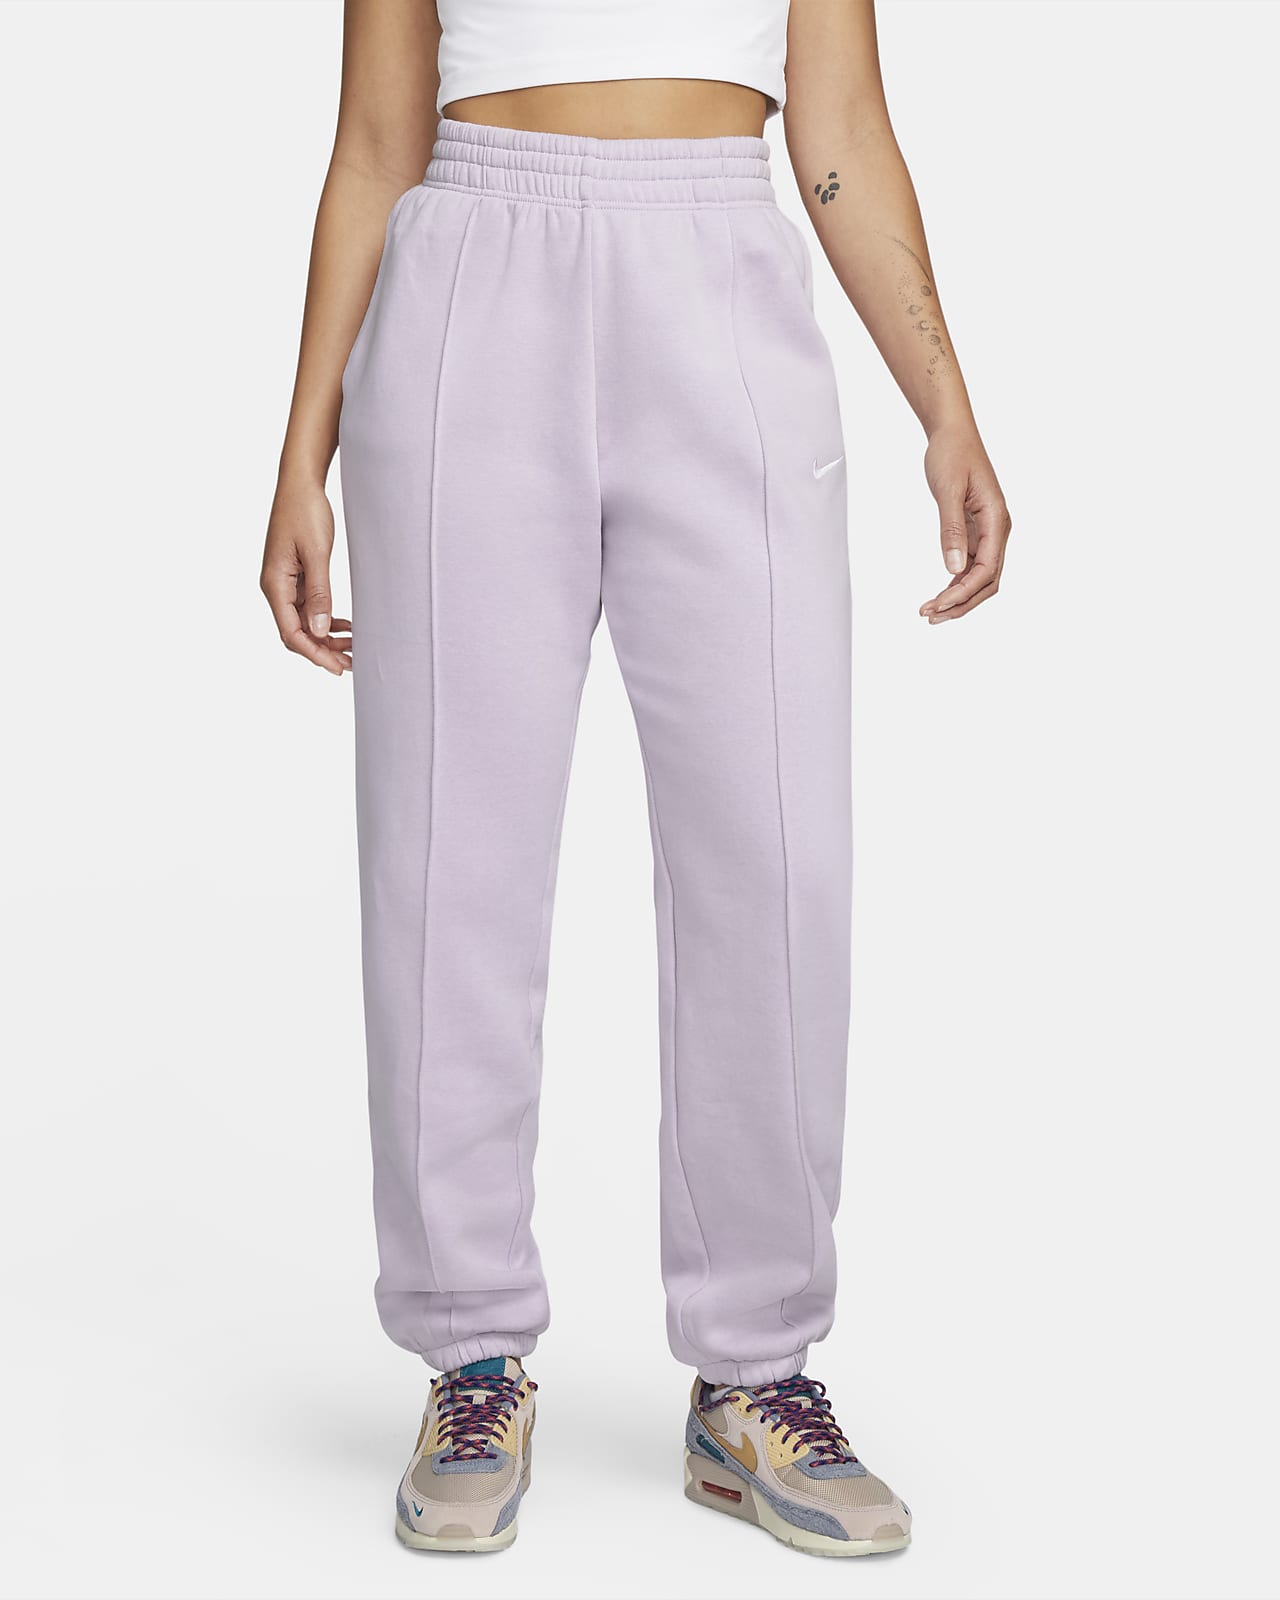 Decathlon tracksuit and joggers WOMEN FASHION Trousers Wide-leg Multicolored 42                  EU discount 90% 